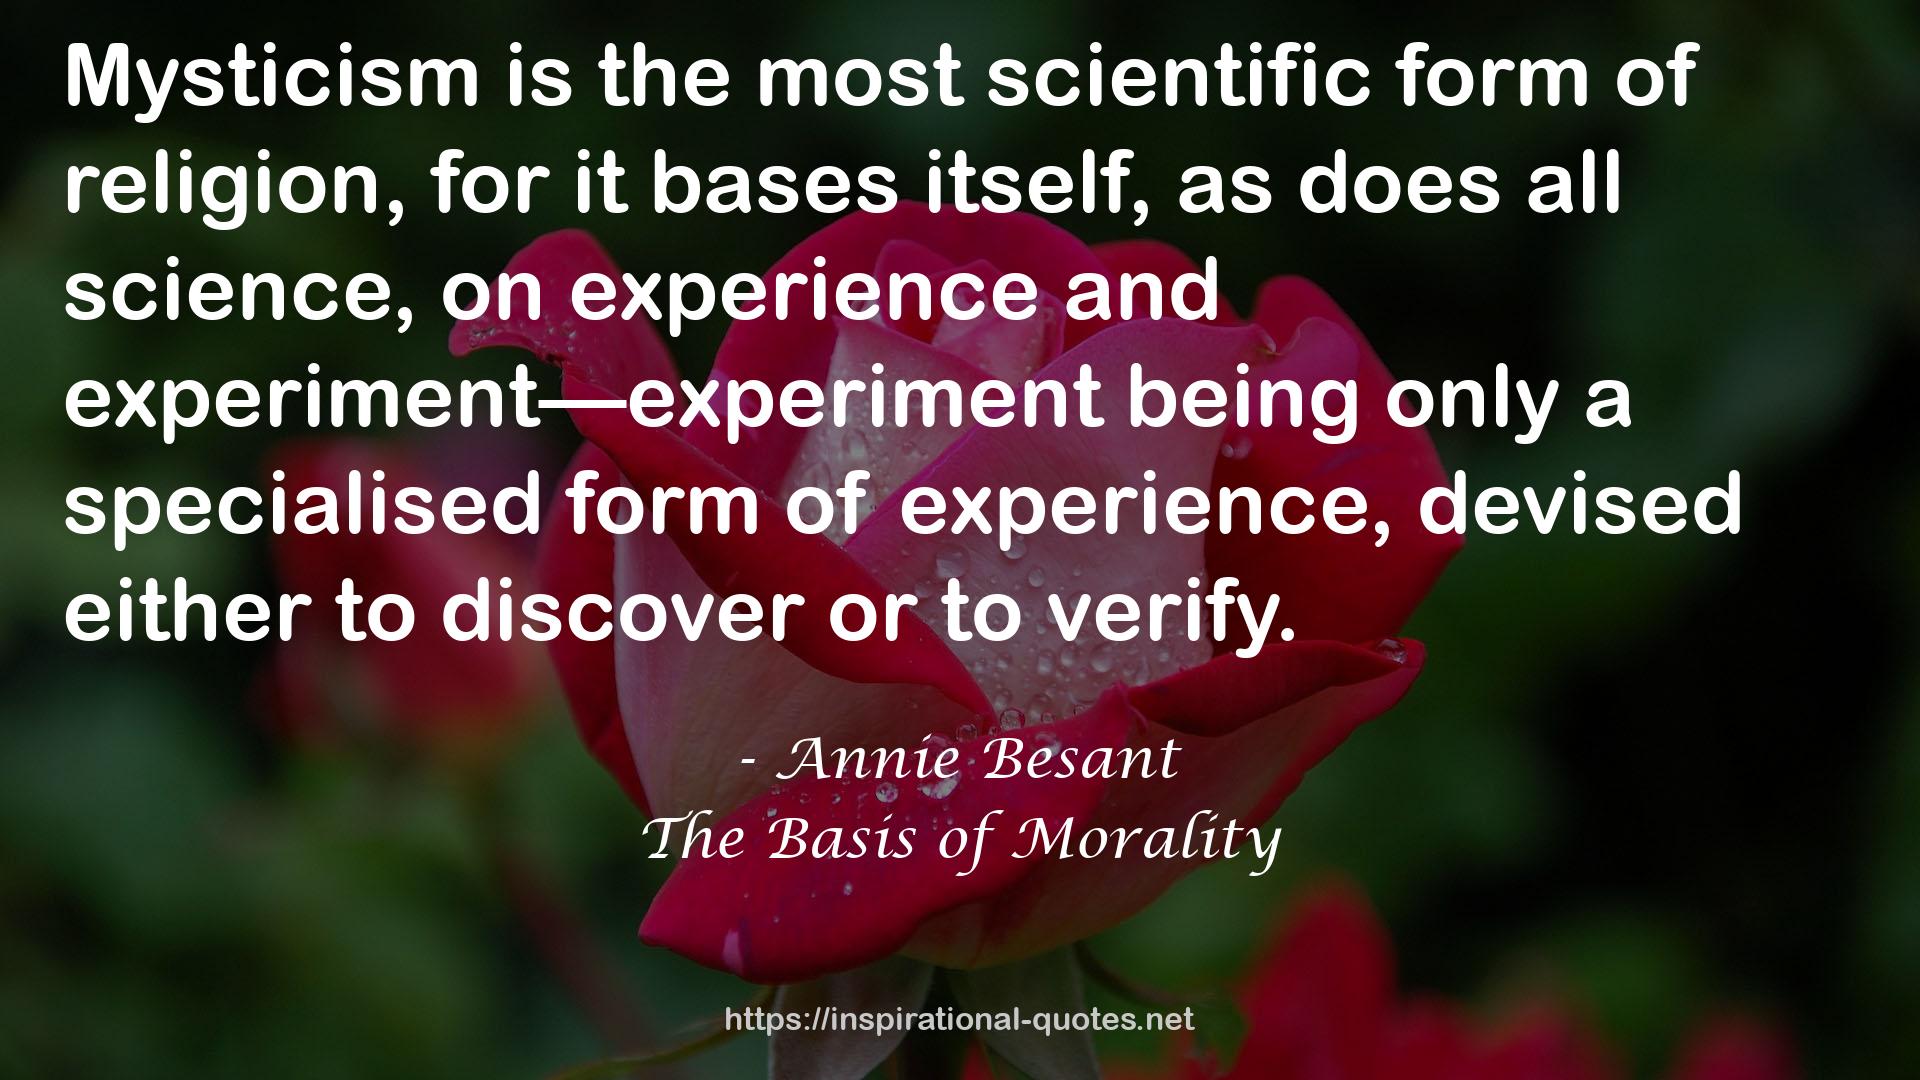 The Basis of Morality QUOTES